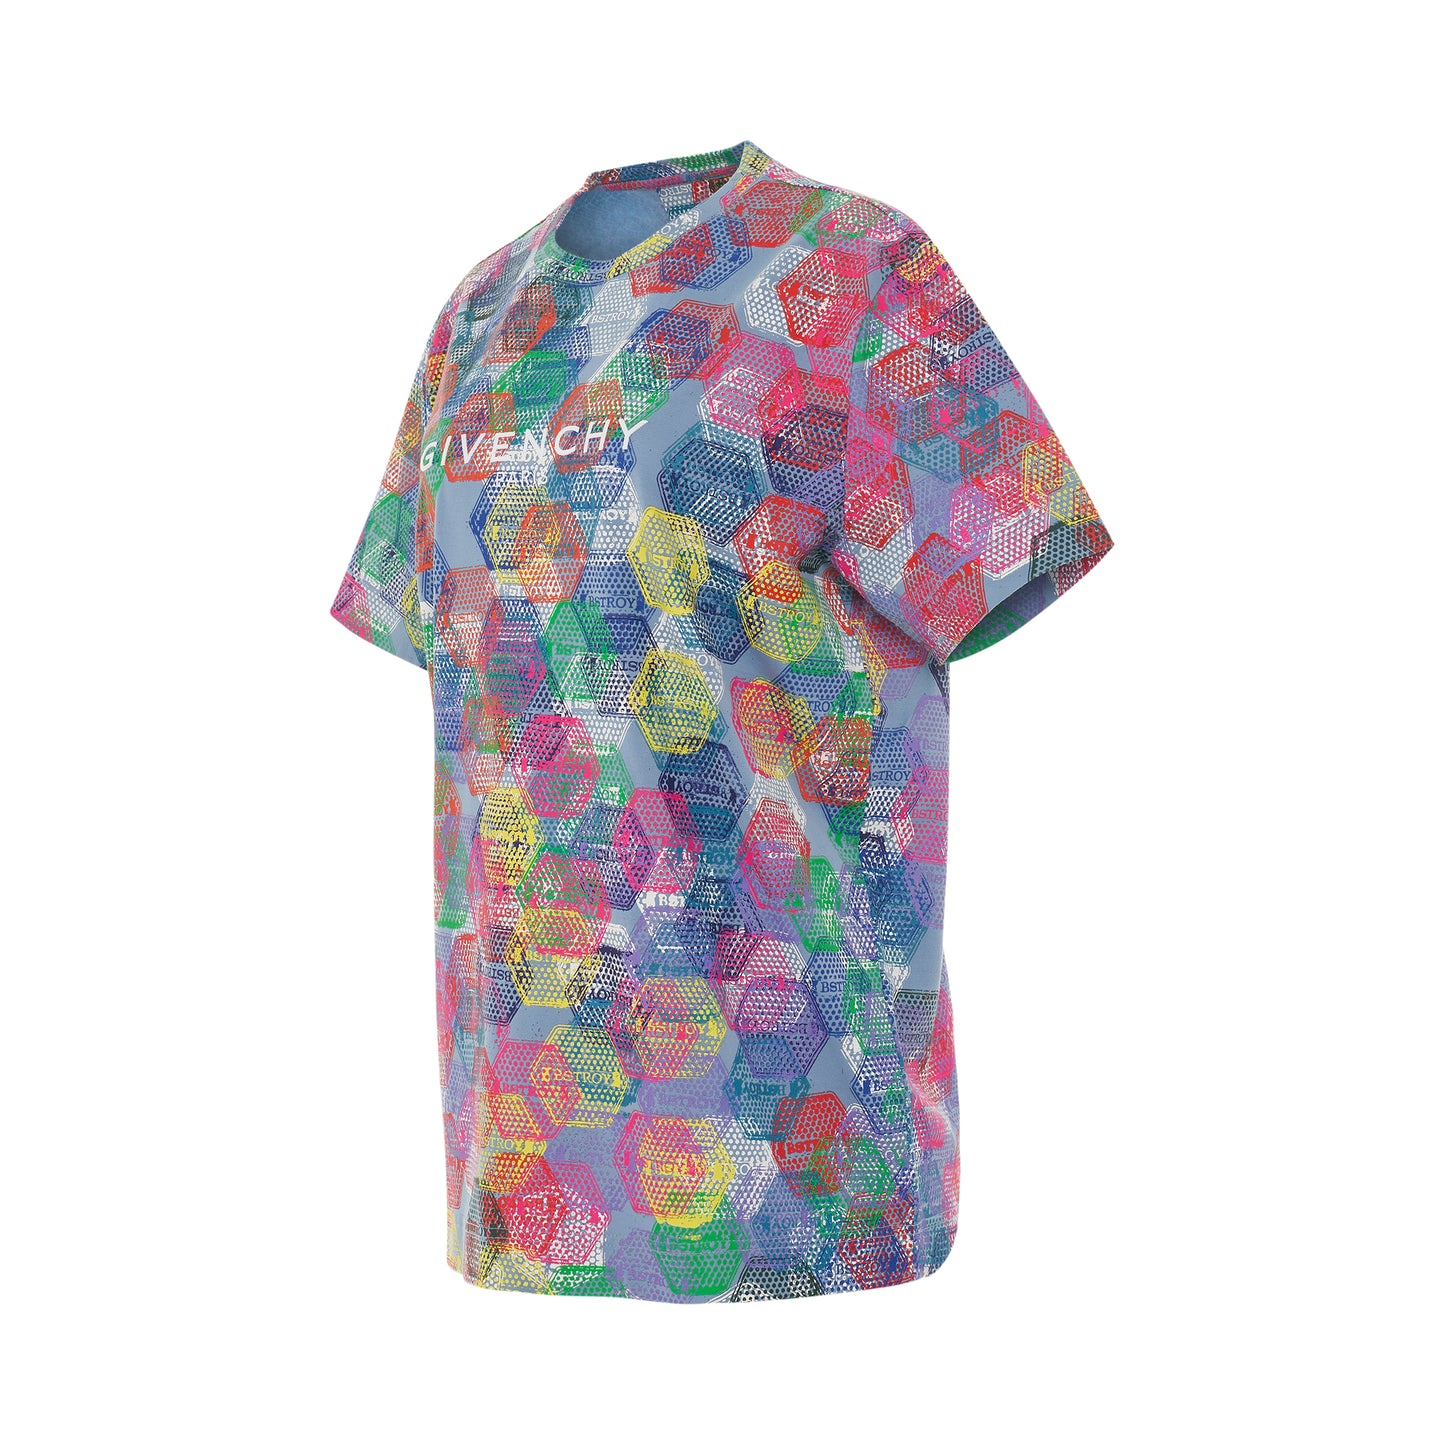 BSTROY All Over Patch Print Loose Fit T-Shirt in Multicolour